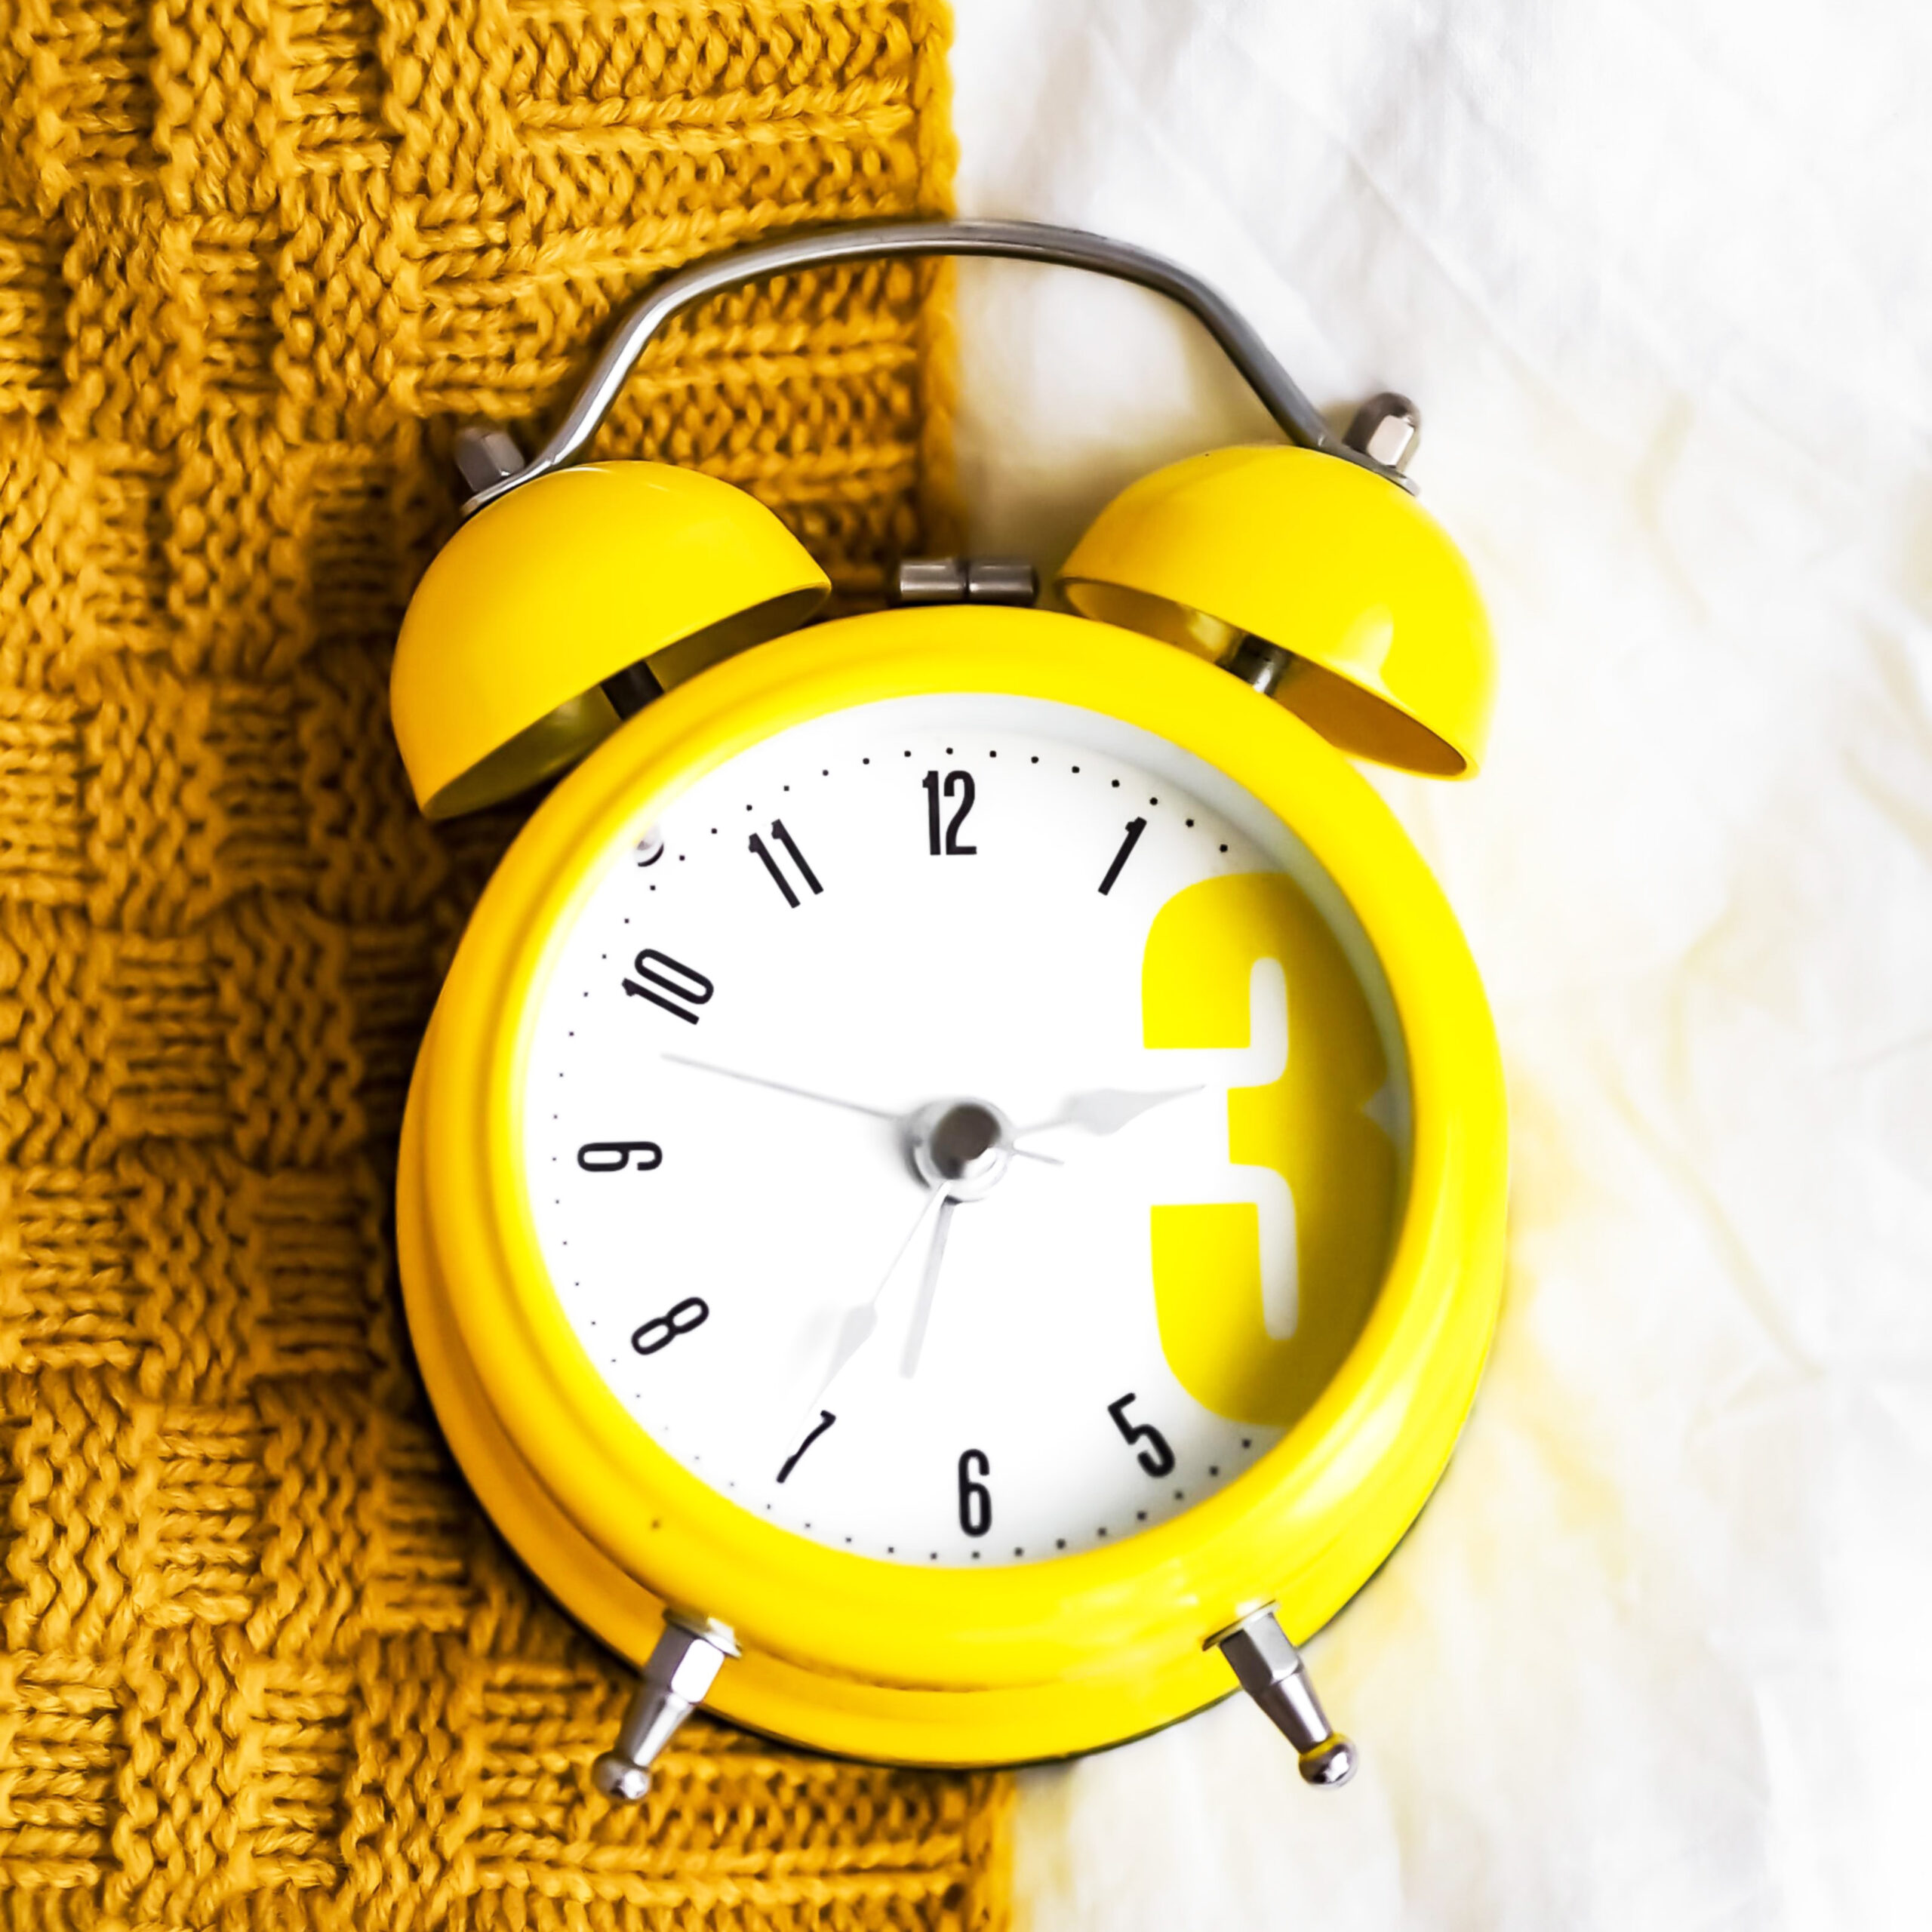 Yellow alarm clock on a table by Laura Chouette via Unsplash